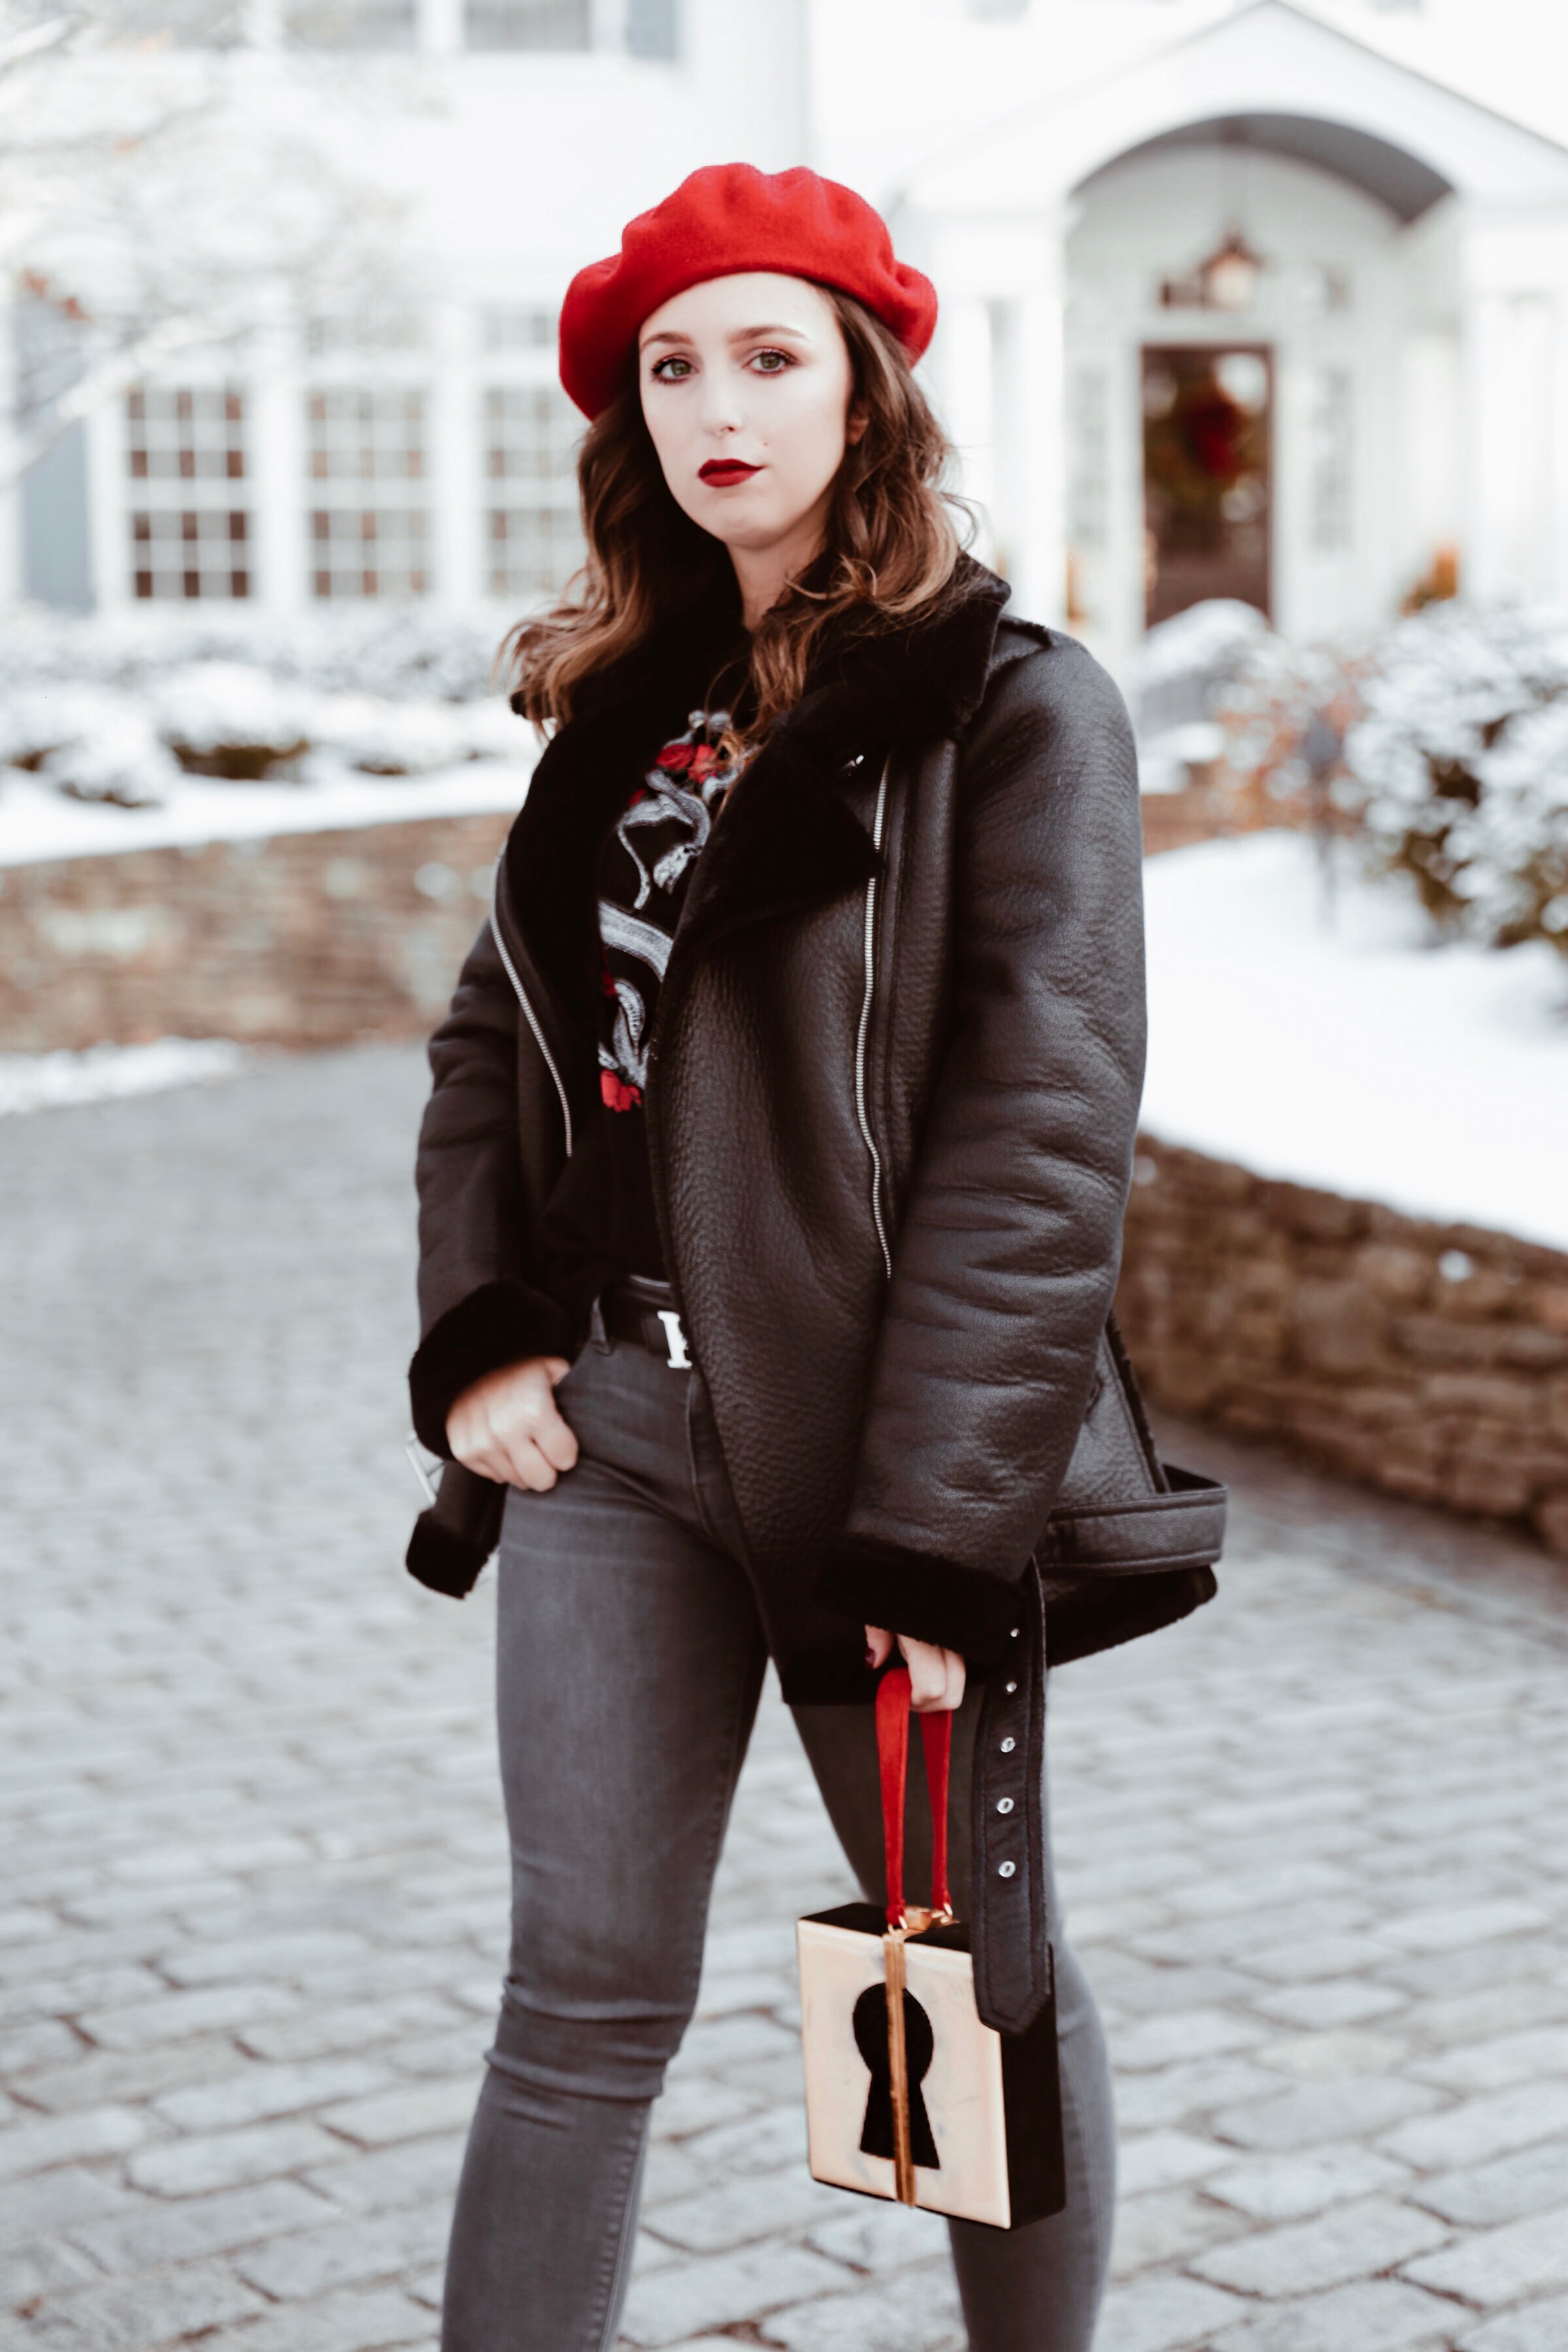 Staying Motivated-beret-pop of red-t shirt-street style-fashion-outfit-edgy style-new york-nyc-suburbs-casual outfit-ootd